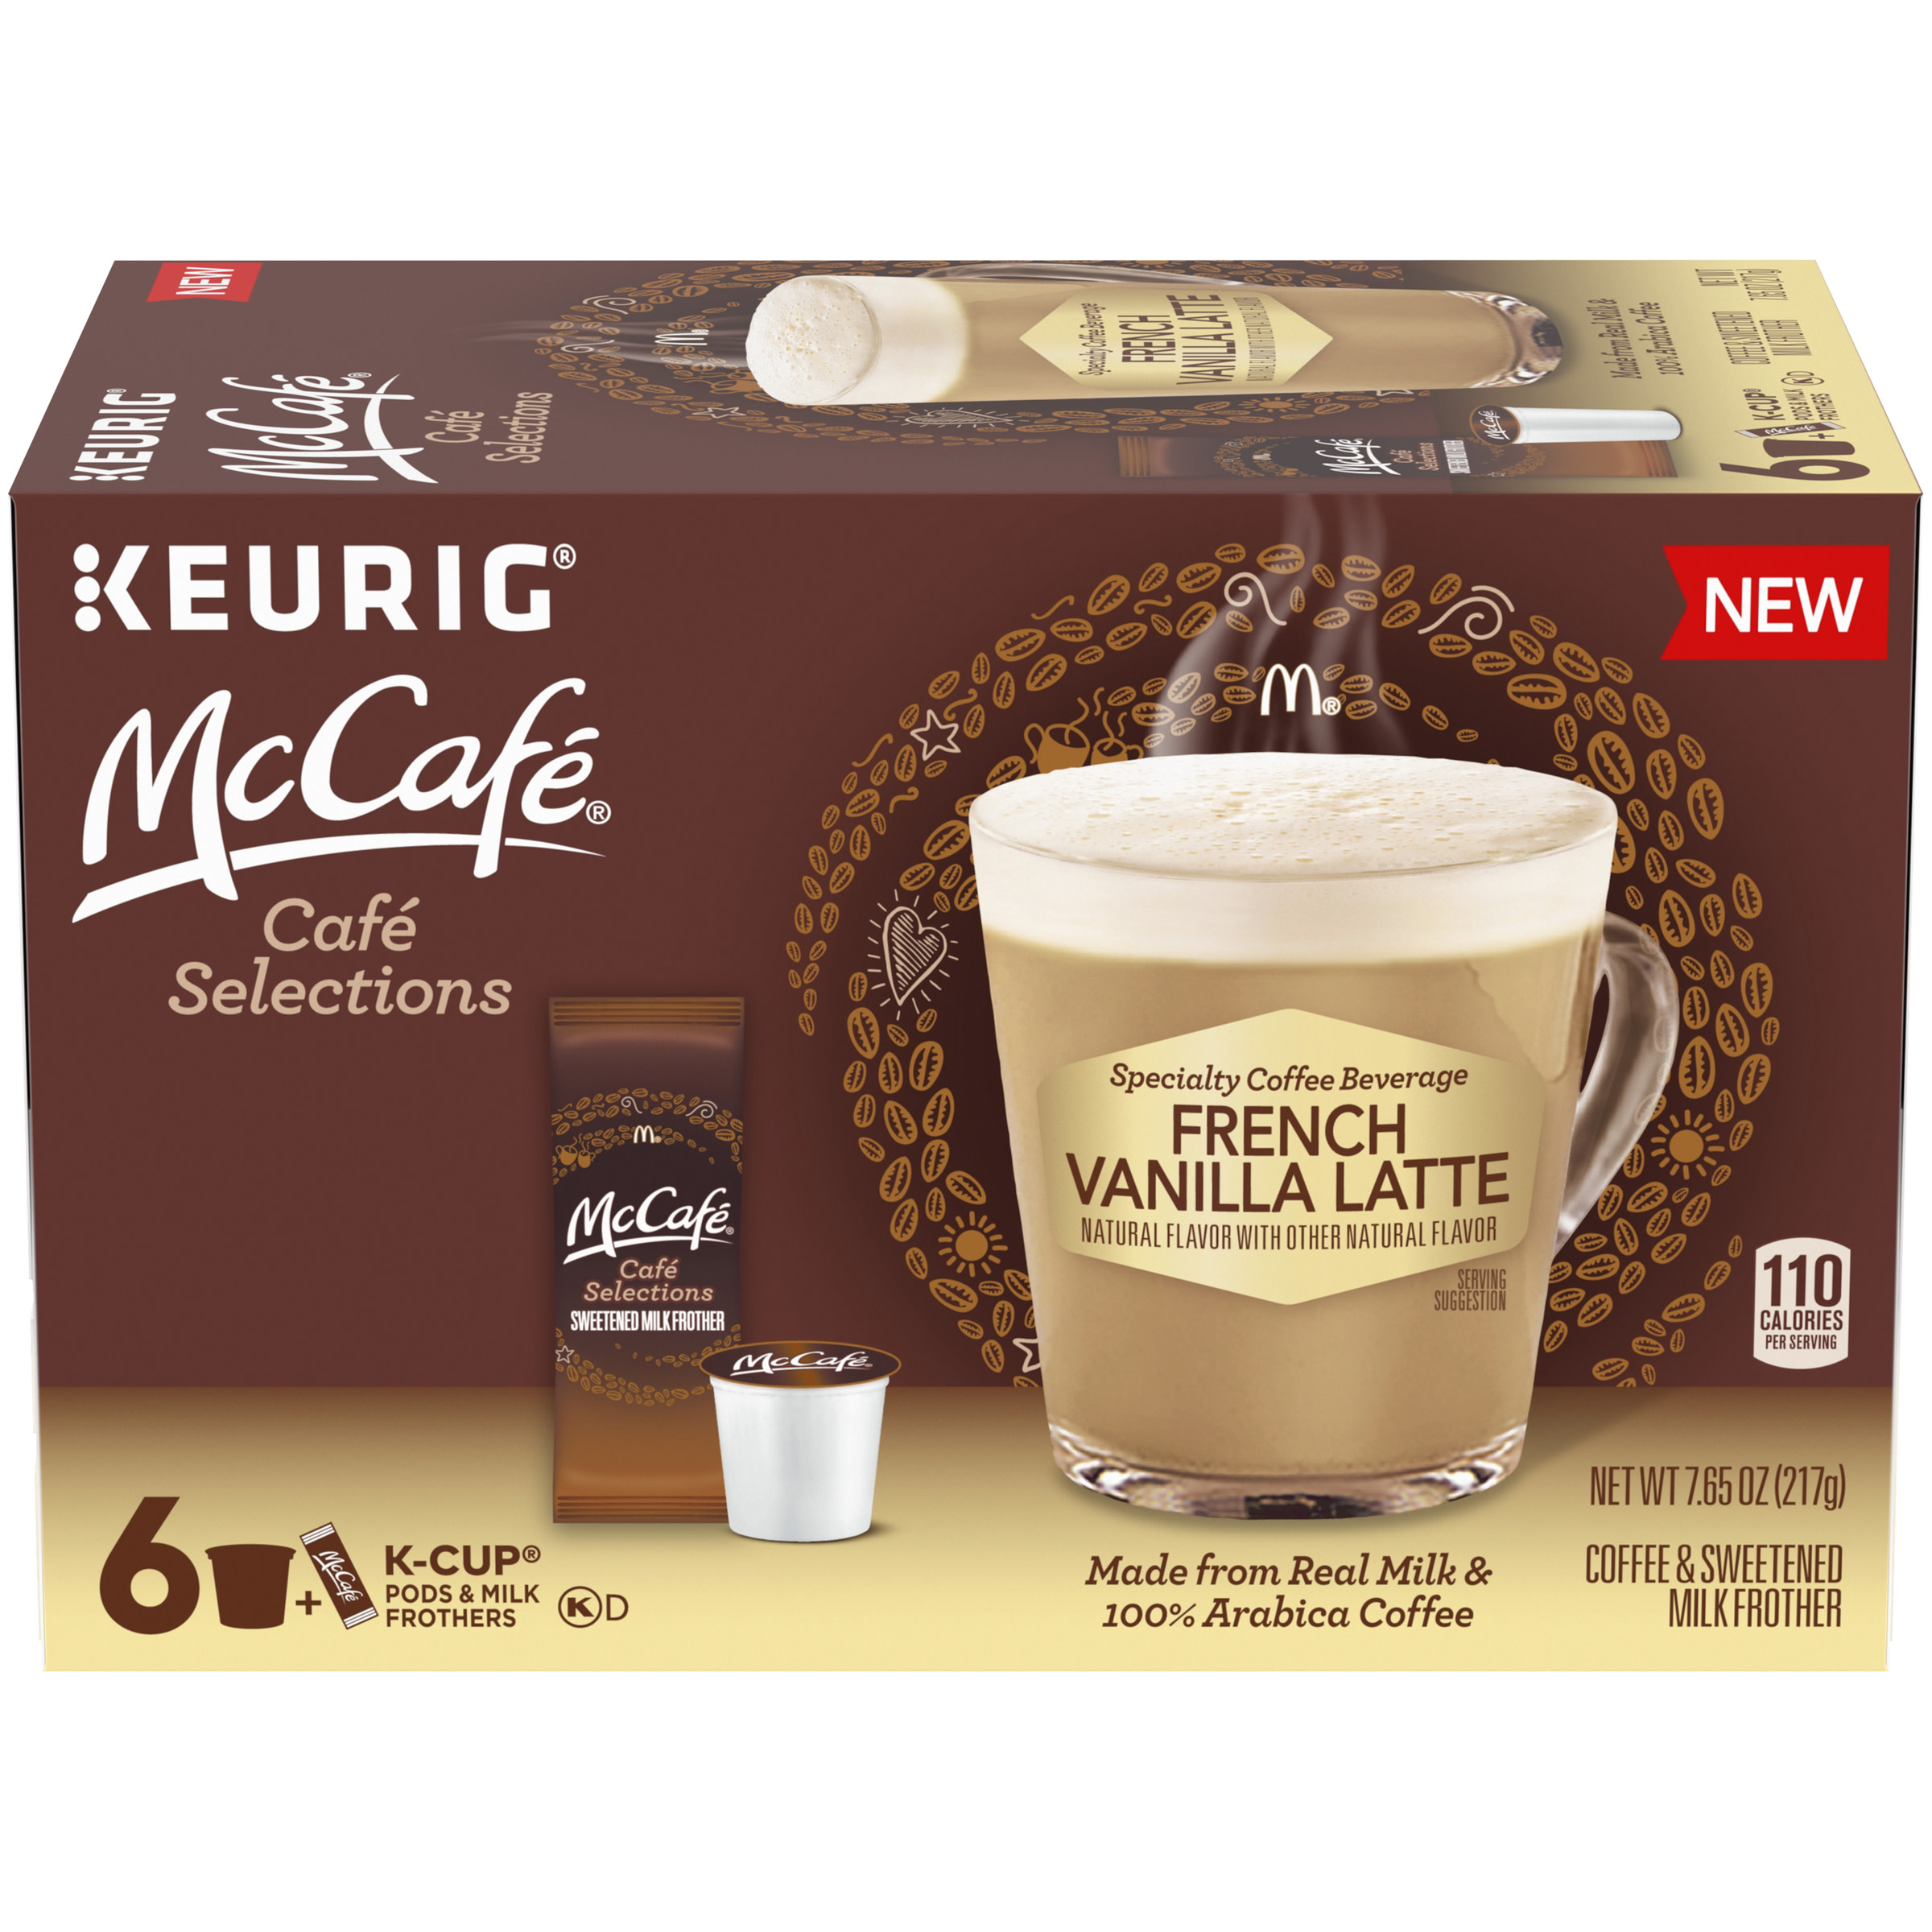 McCafe Cafe Selections French Vanilla Coffee Keurig K Cup Pods & Froth Packets, 6 ct Box - image 1 of 9